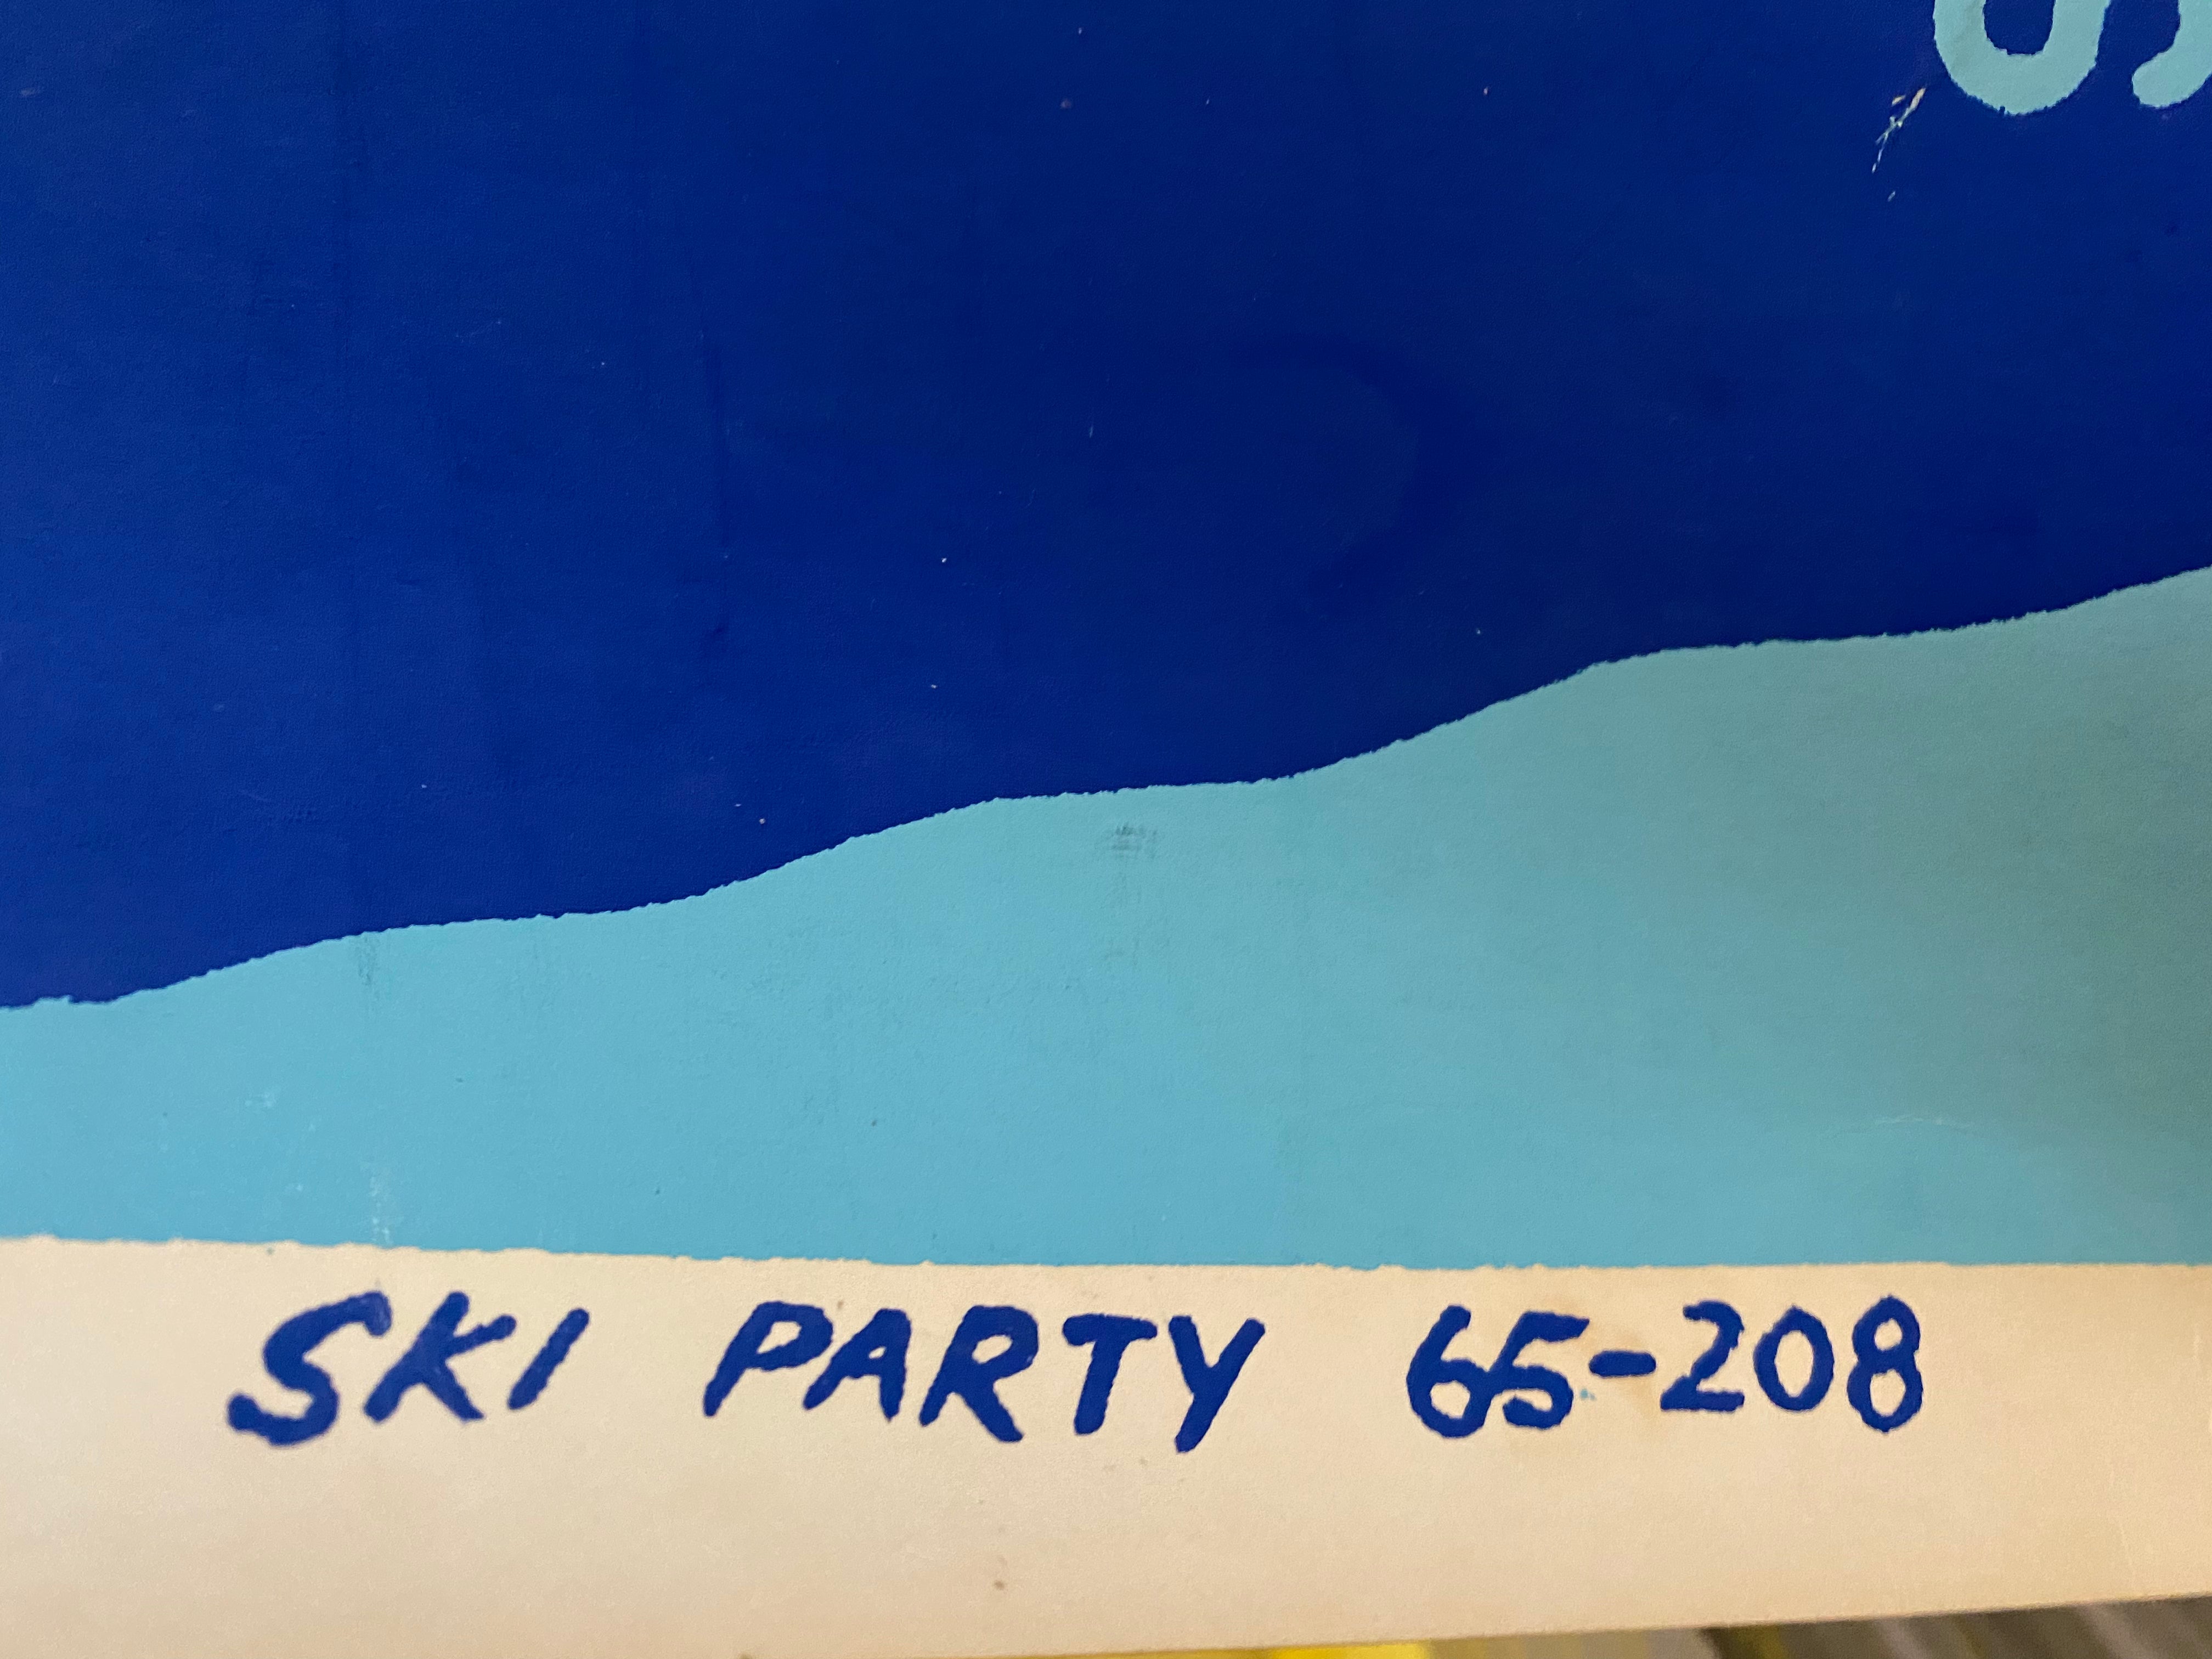 1965 Ski Party Film Banner Poster, closeup of date